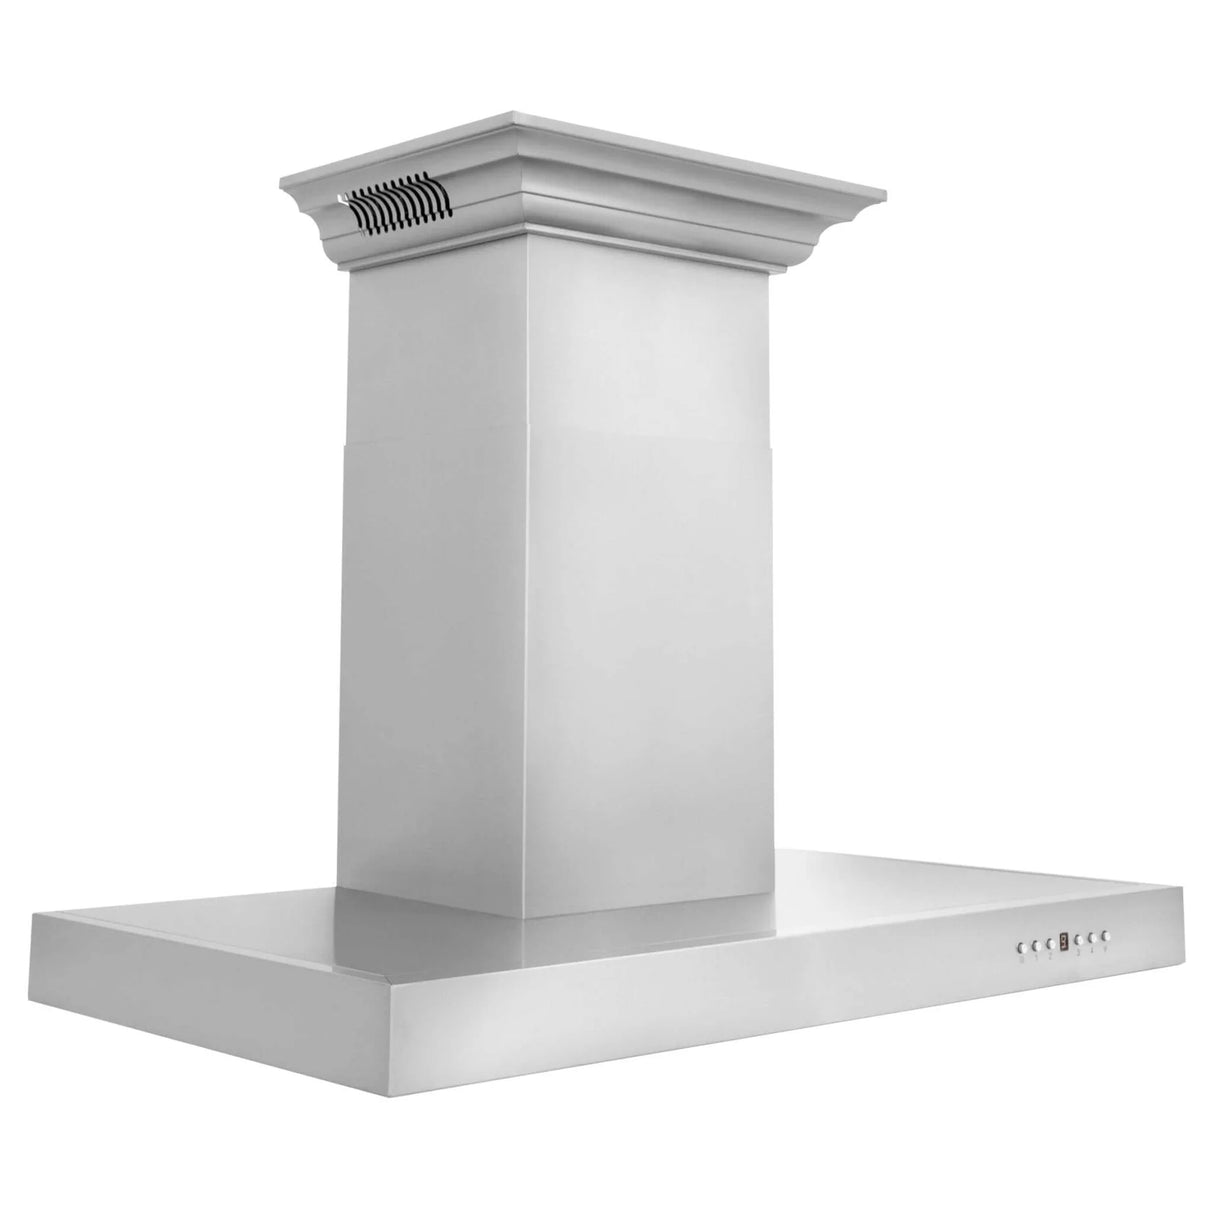 ZLINE 30" CrownSound™ Ducted Vent Wall Mount Range Hood in Stainless Steel with Built-in Bluetooth Speakers